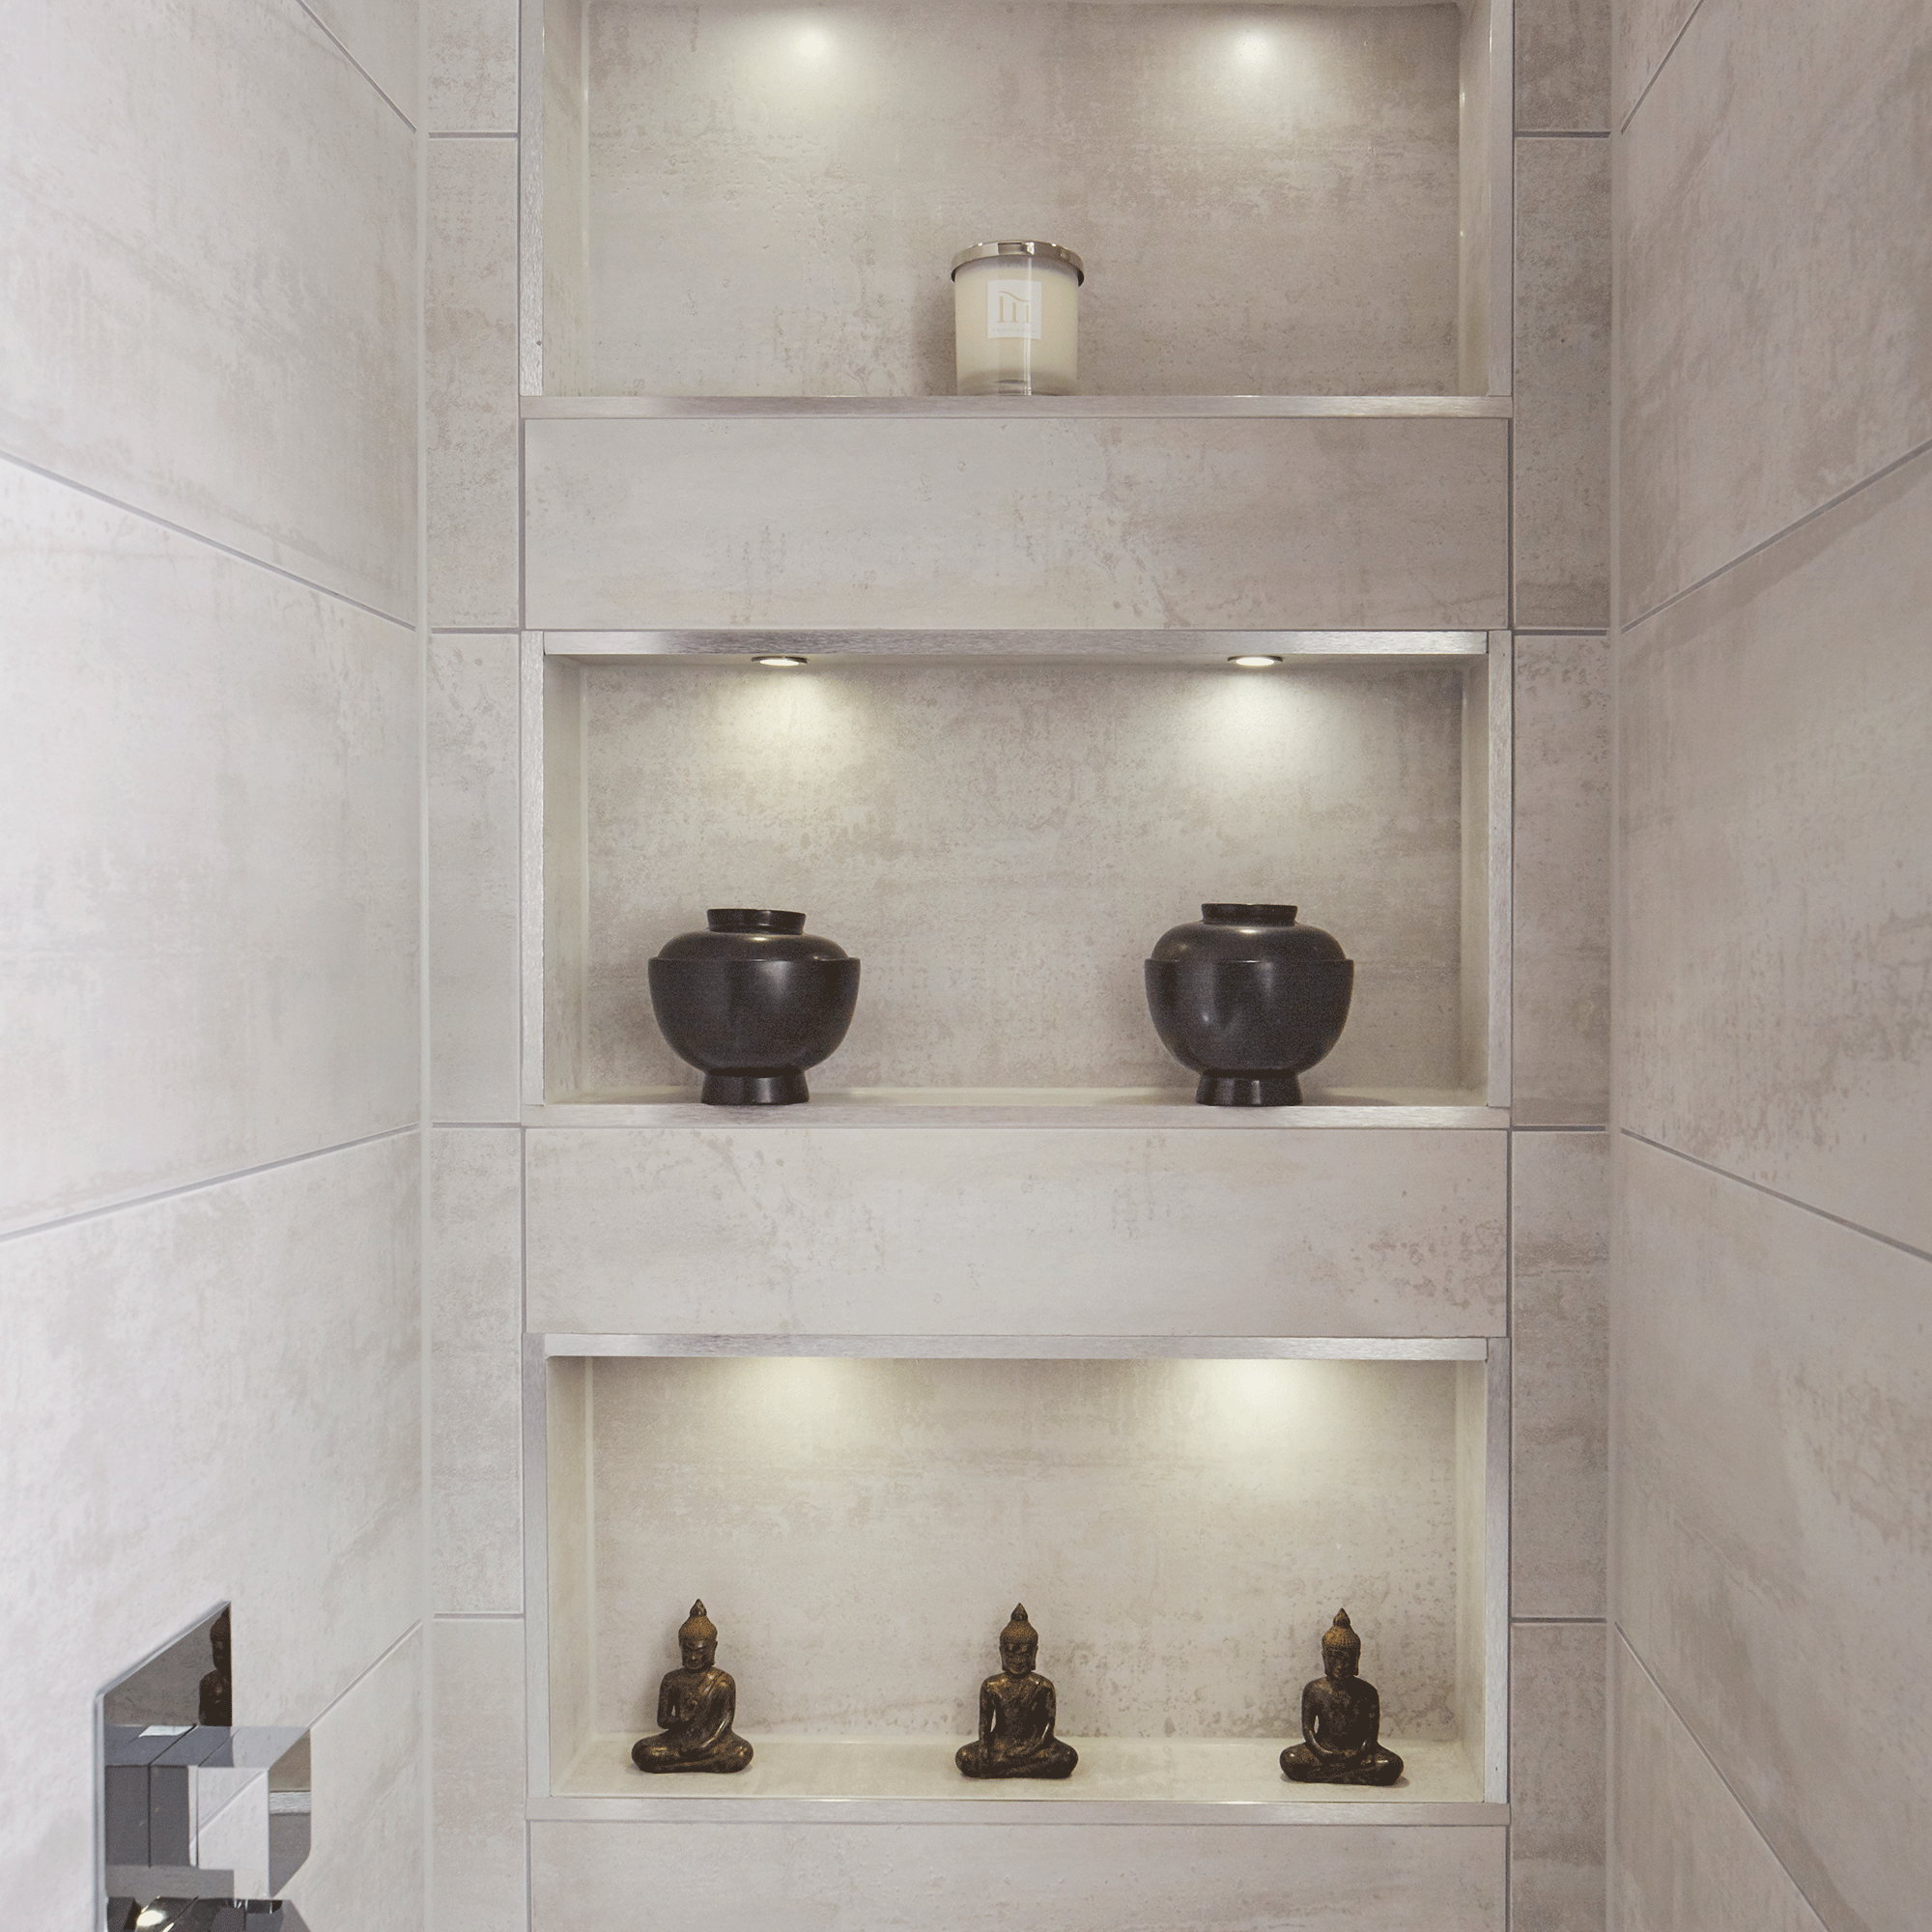 Bathroom shelves with recessed lights